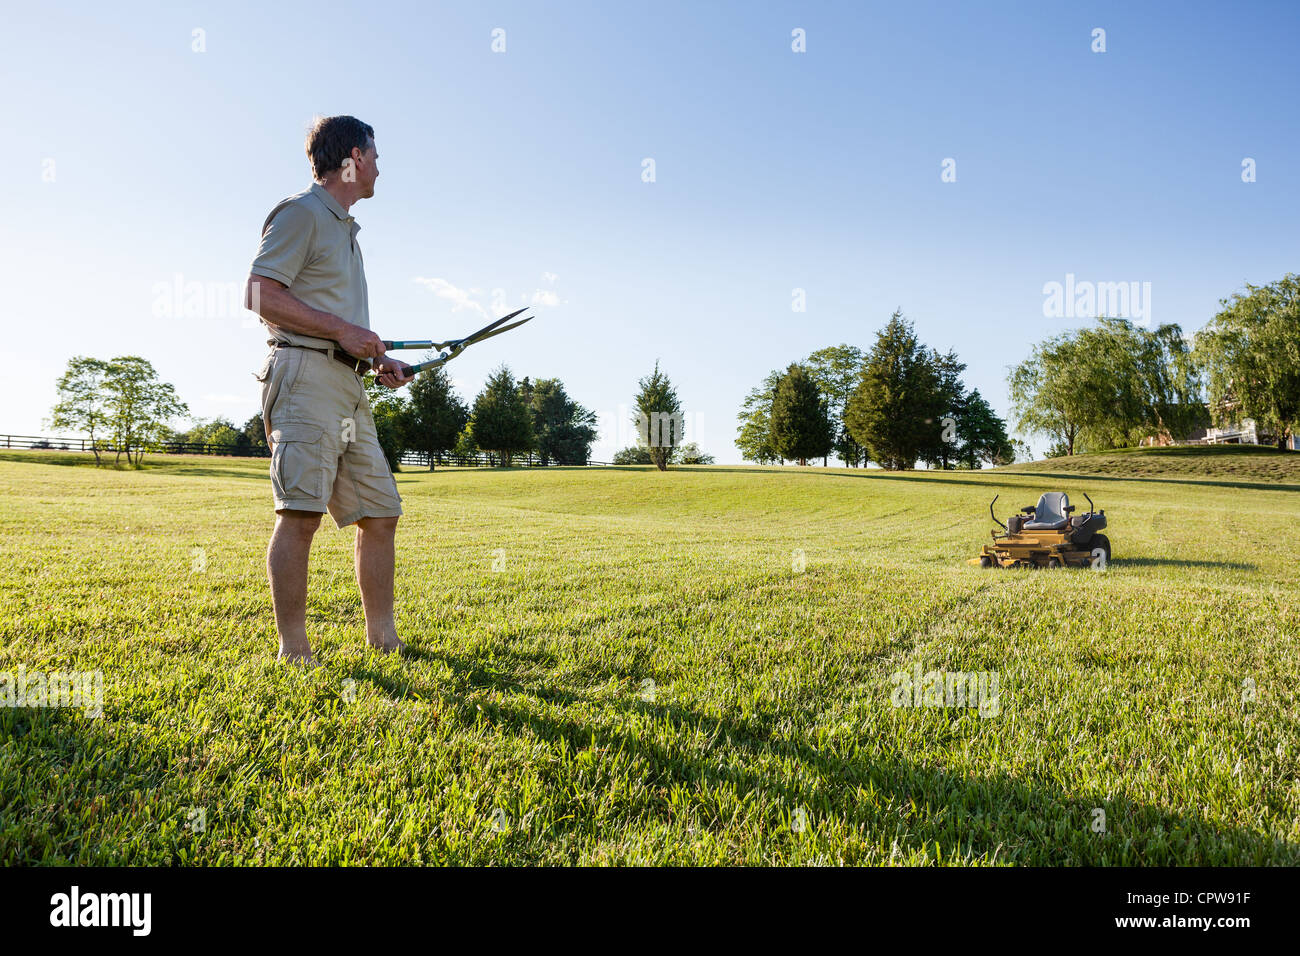 Challenging task of cutting large lawn with grass shears by hand with mower in background Stock Photo